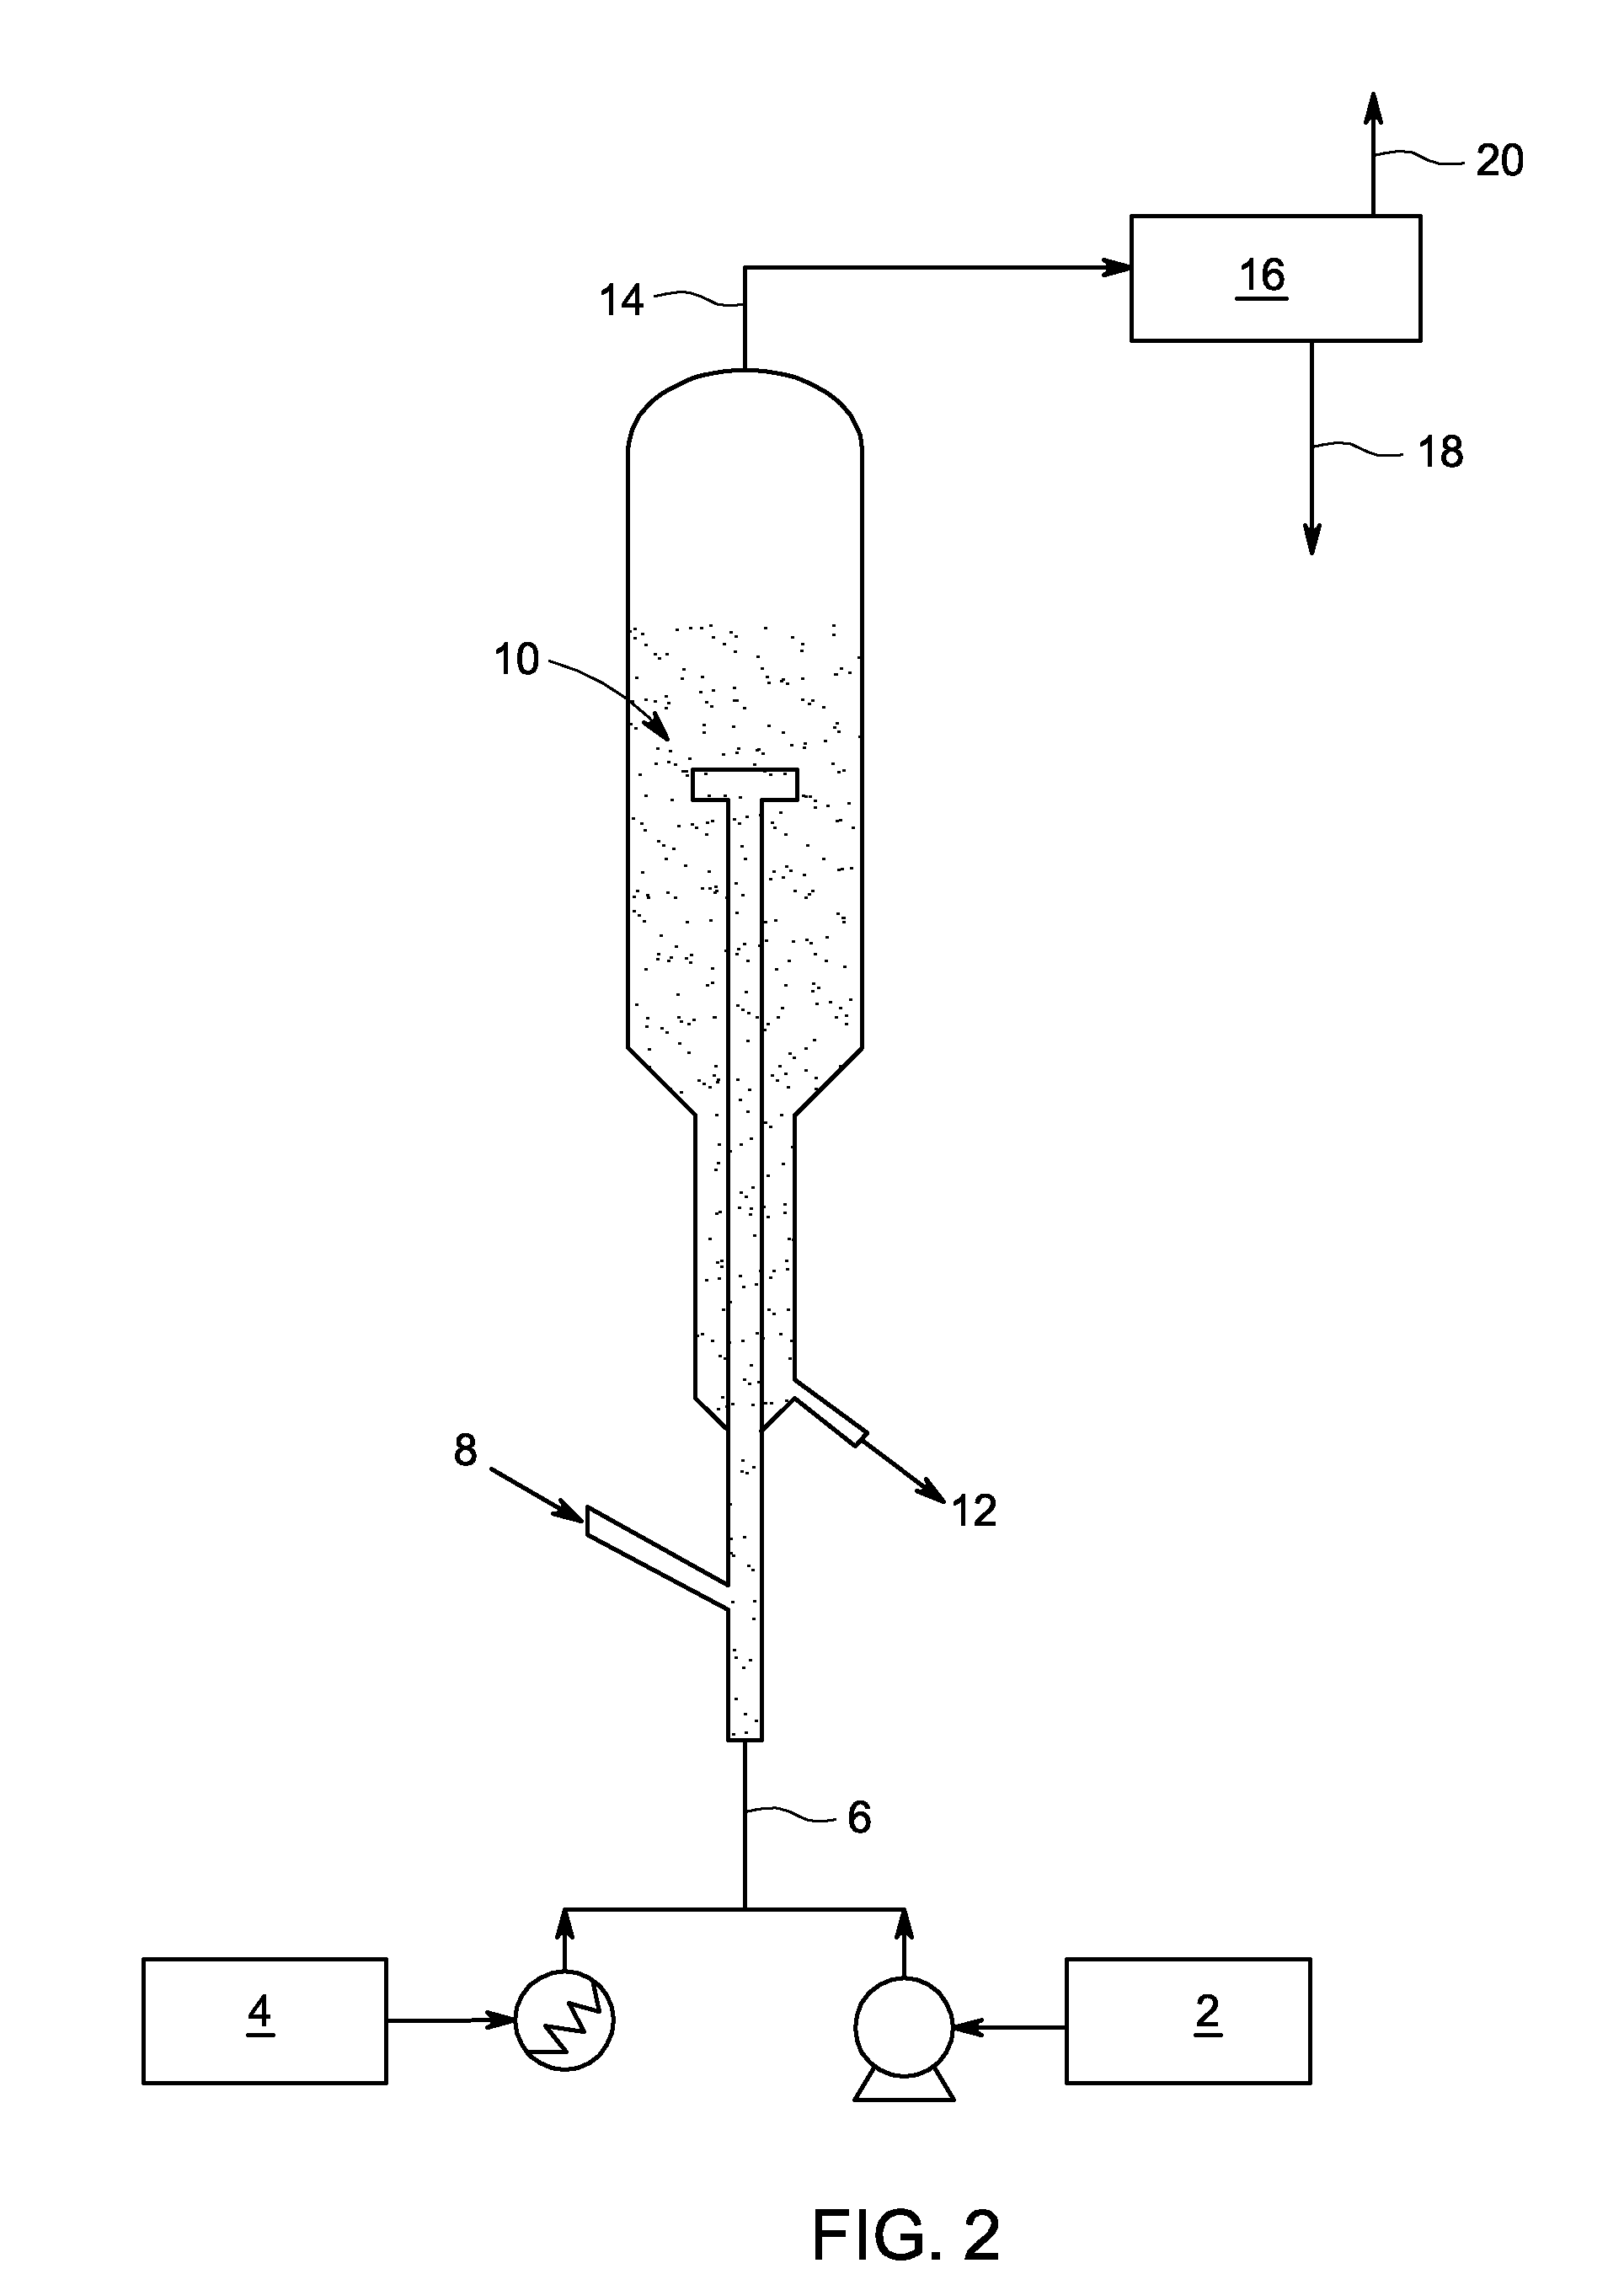 Methods for removing contaminants from water